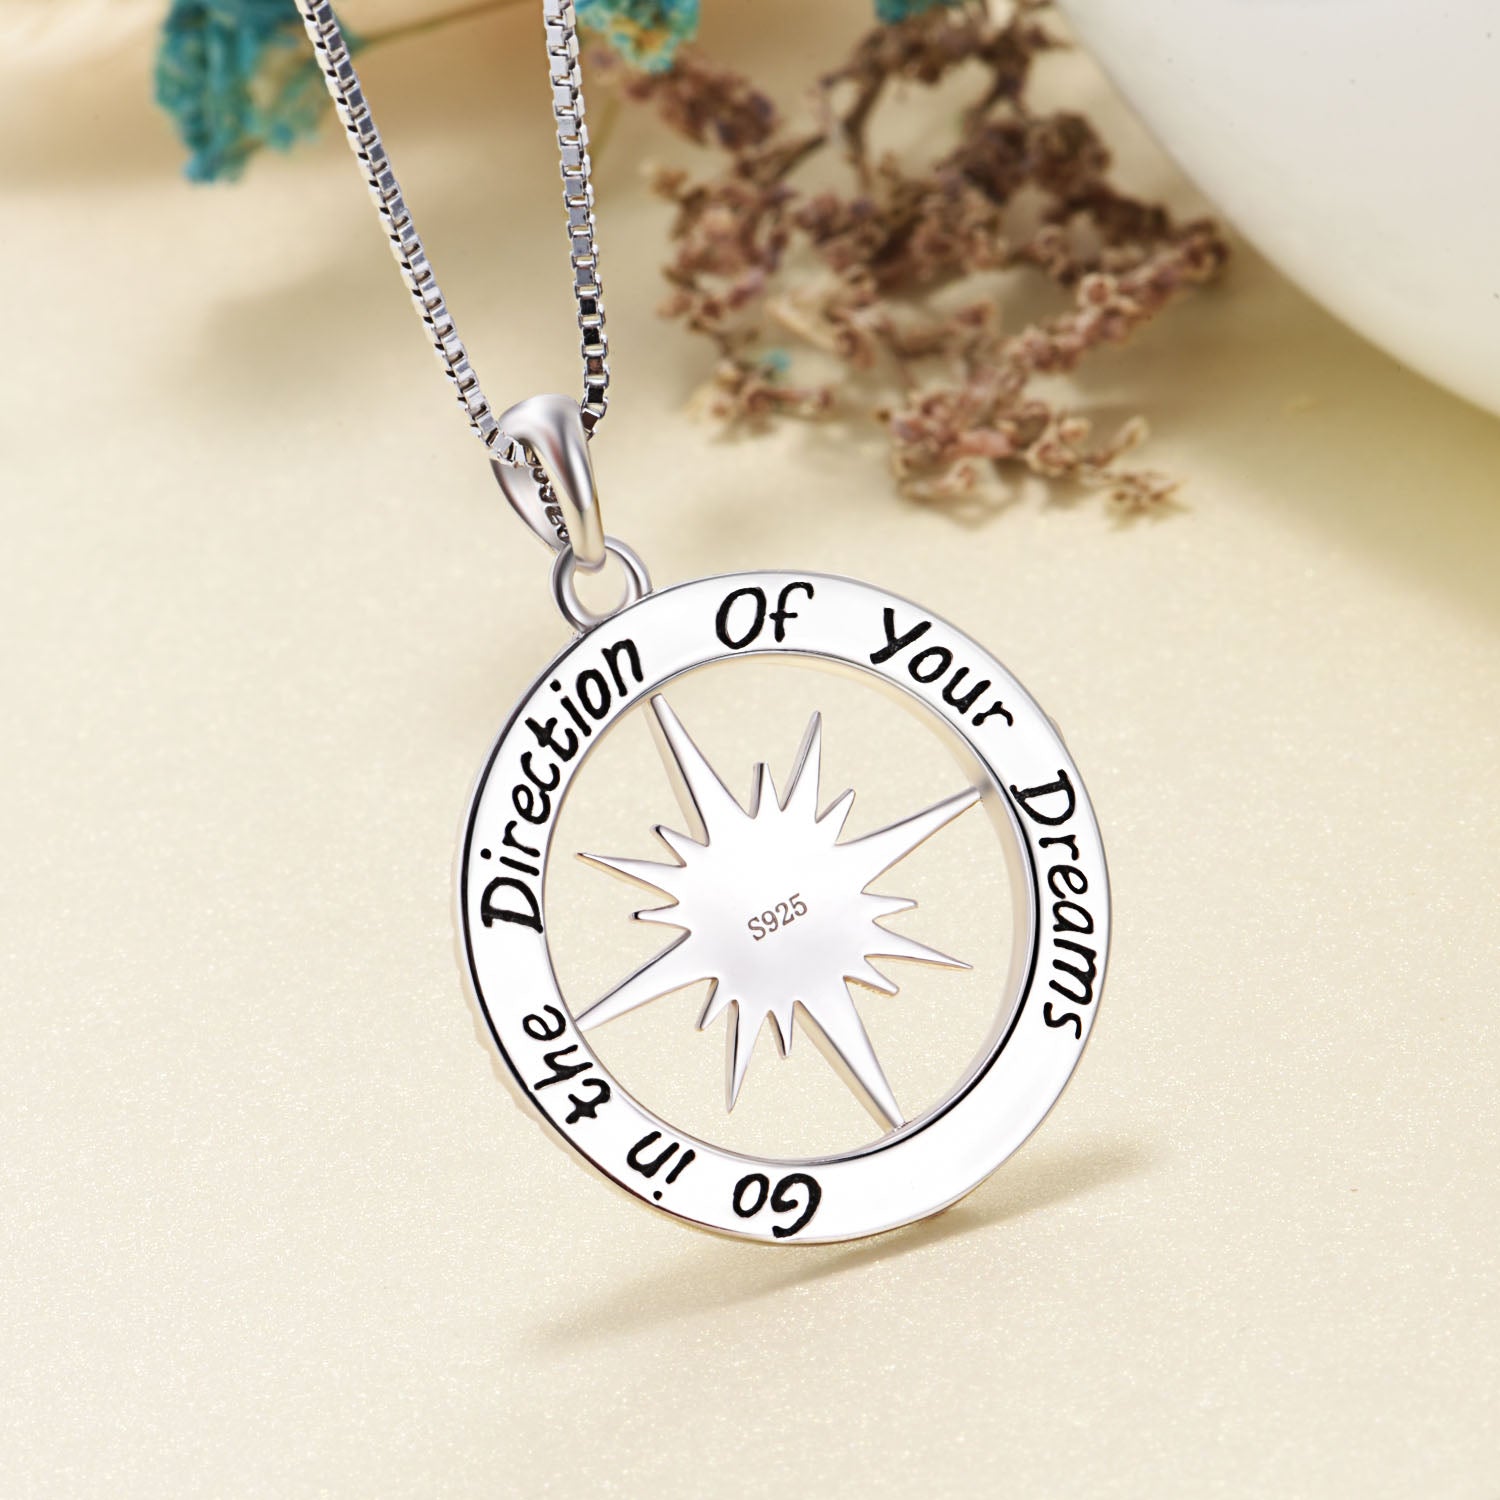 Compass Necklace East West South North Man Traveling Jewelry Necklace